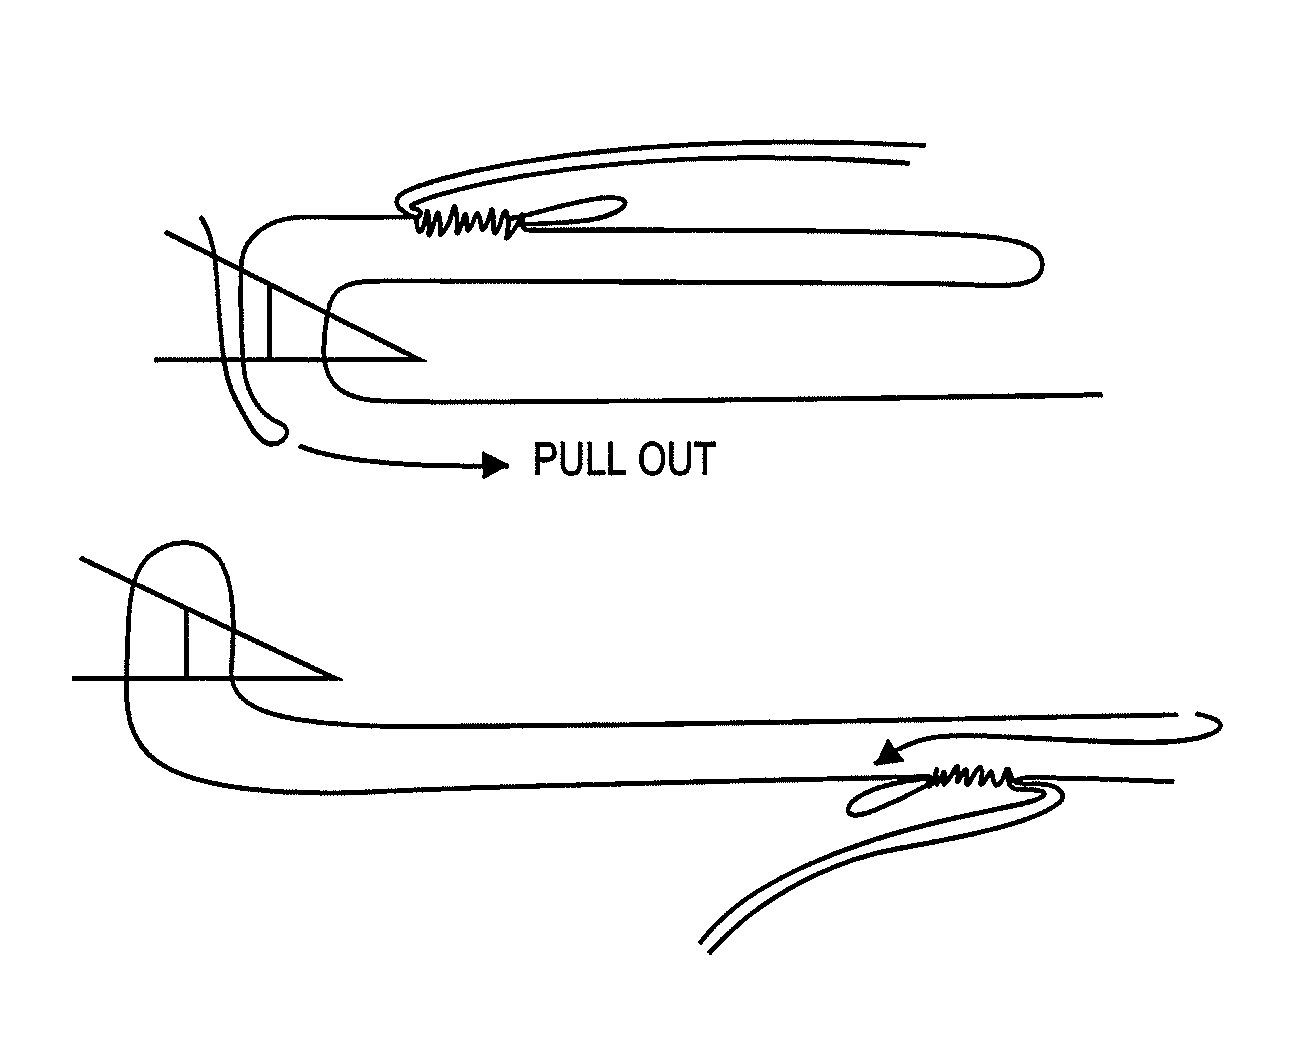 Pre-tied surgical knots for use with suture passers